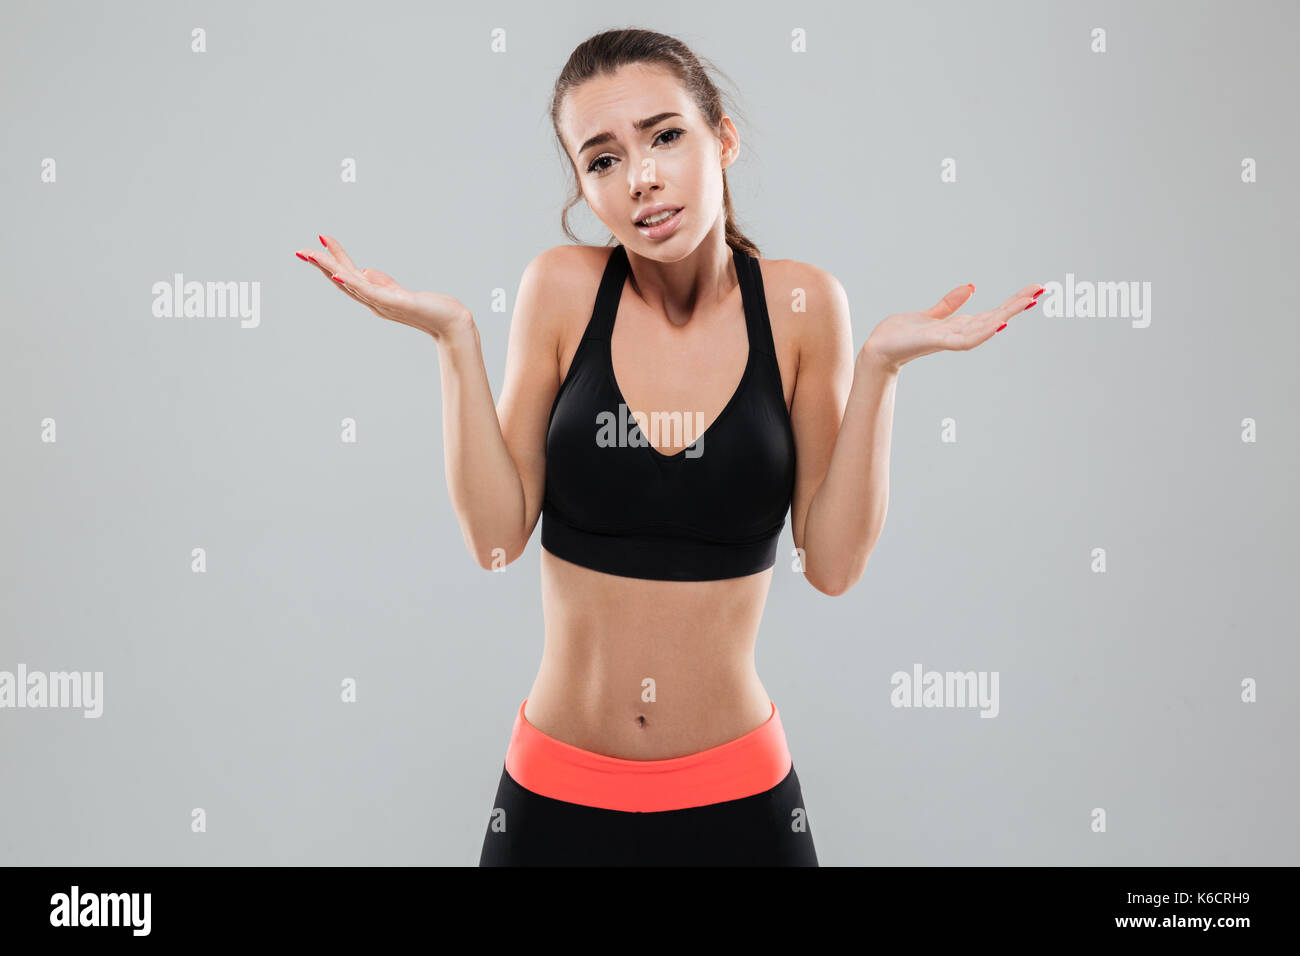 Sports woman shrugging shoulders and looking at the camera over gray background Stock Photo